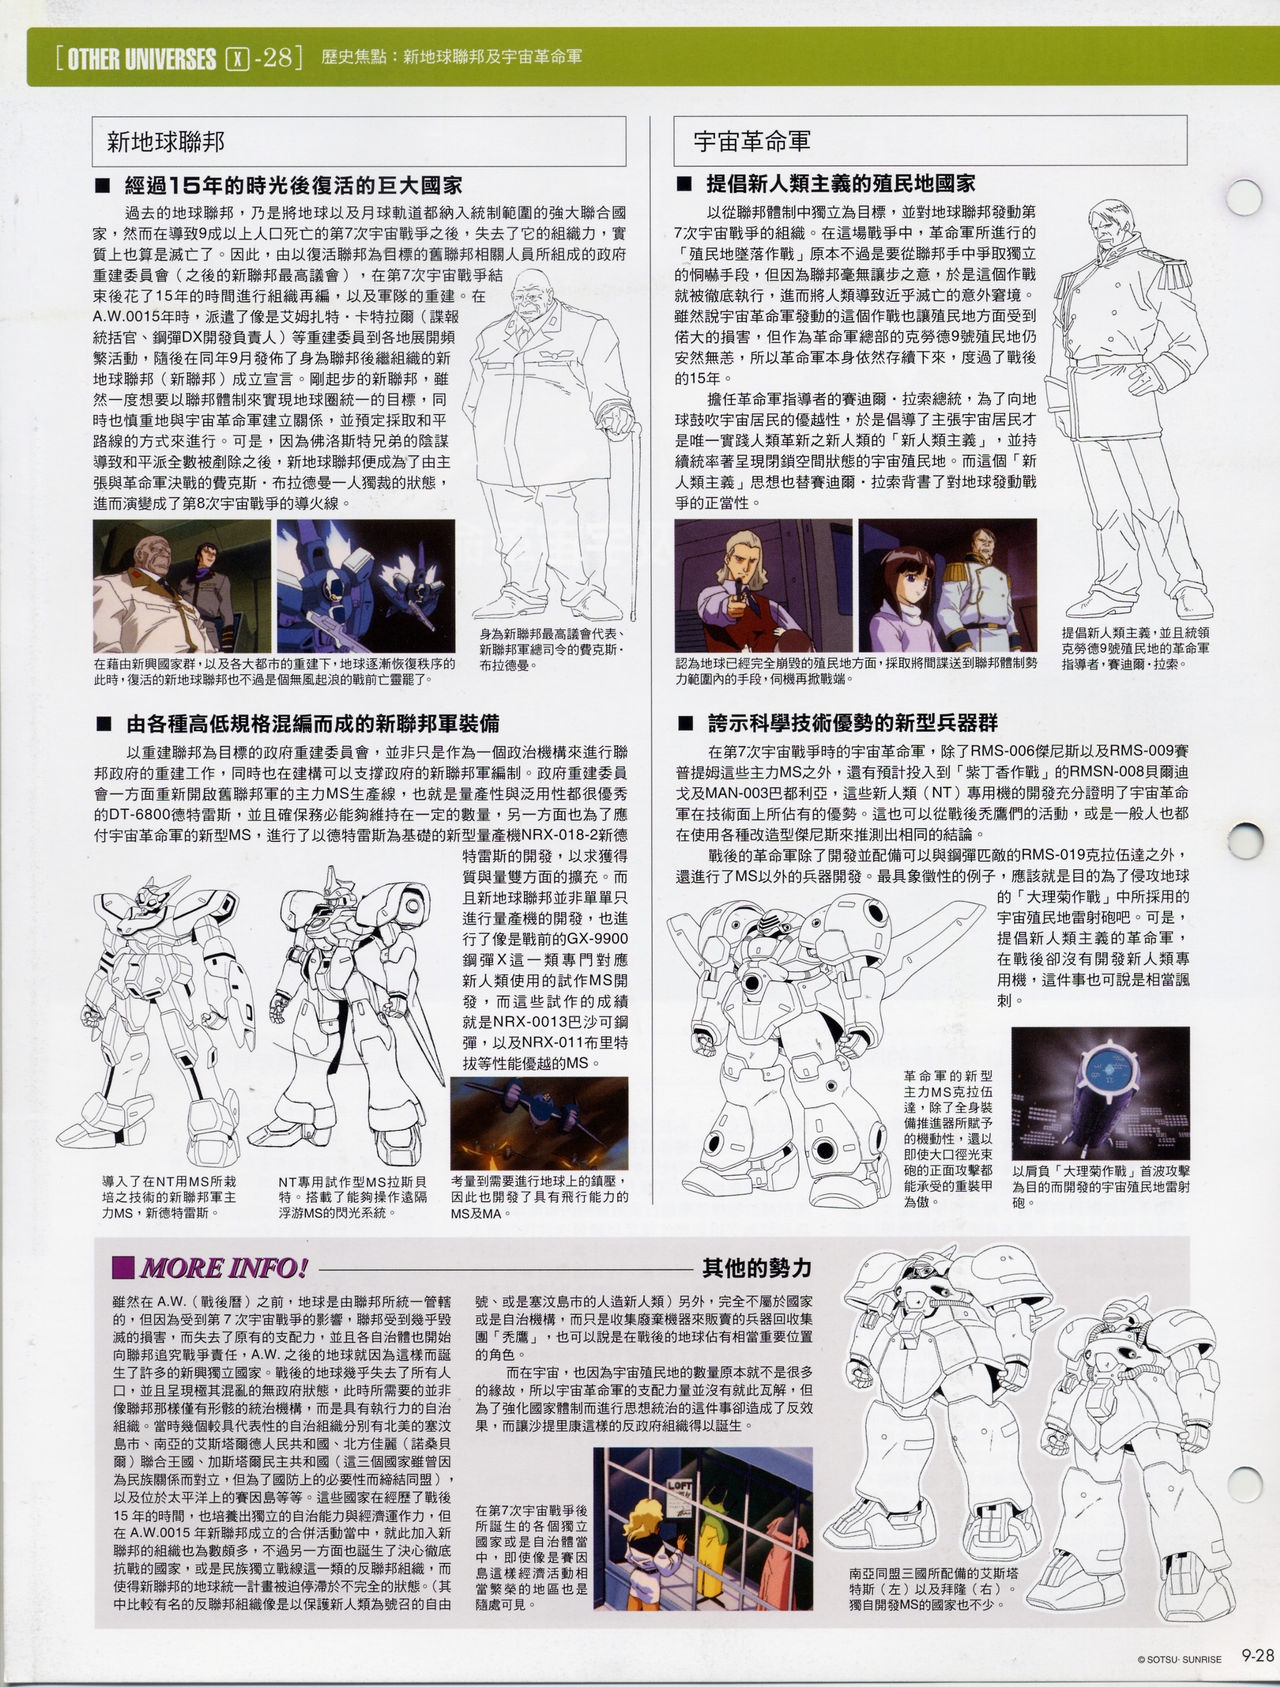 The Official Gundam Fact File - 009 [Chinese] 30